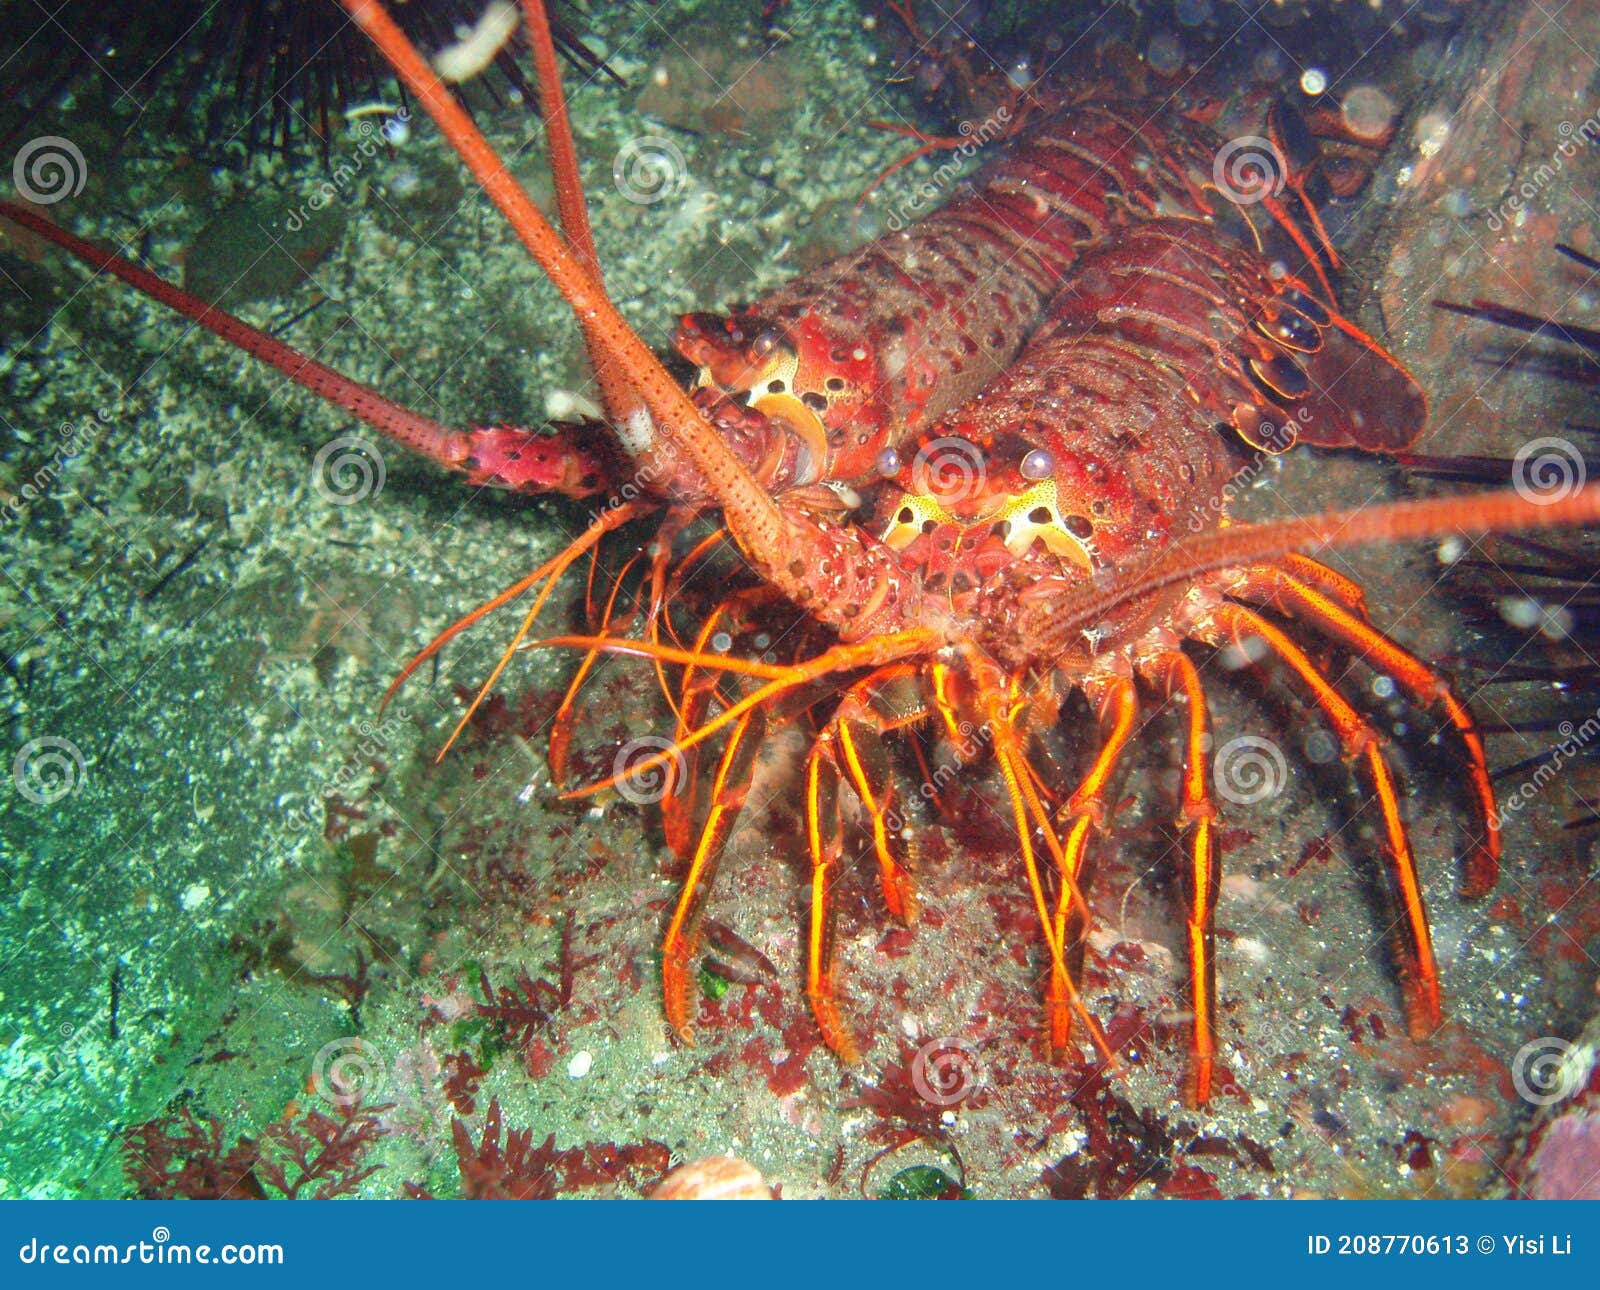 the california spiny lobsters at noaa channel islands national marine sanctuary are ready for the weekend